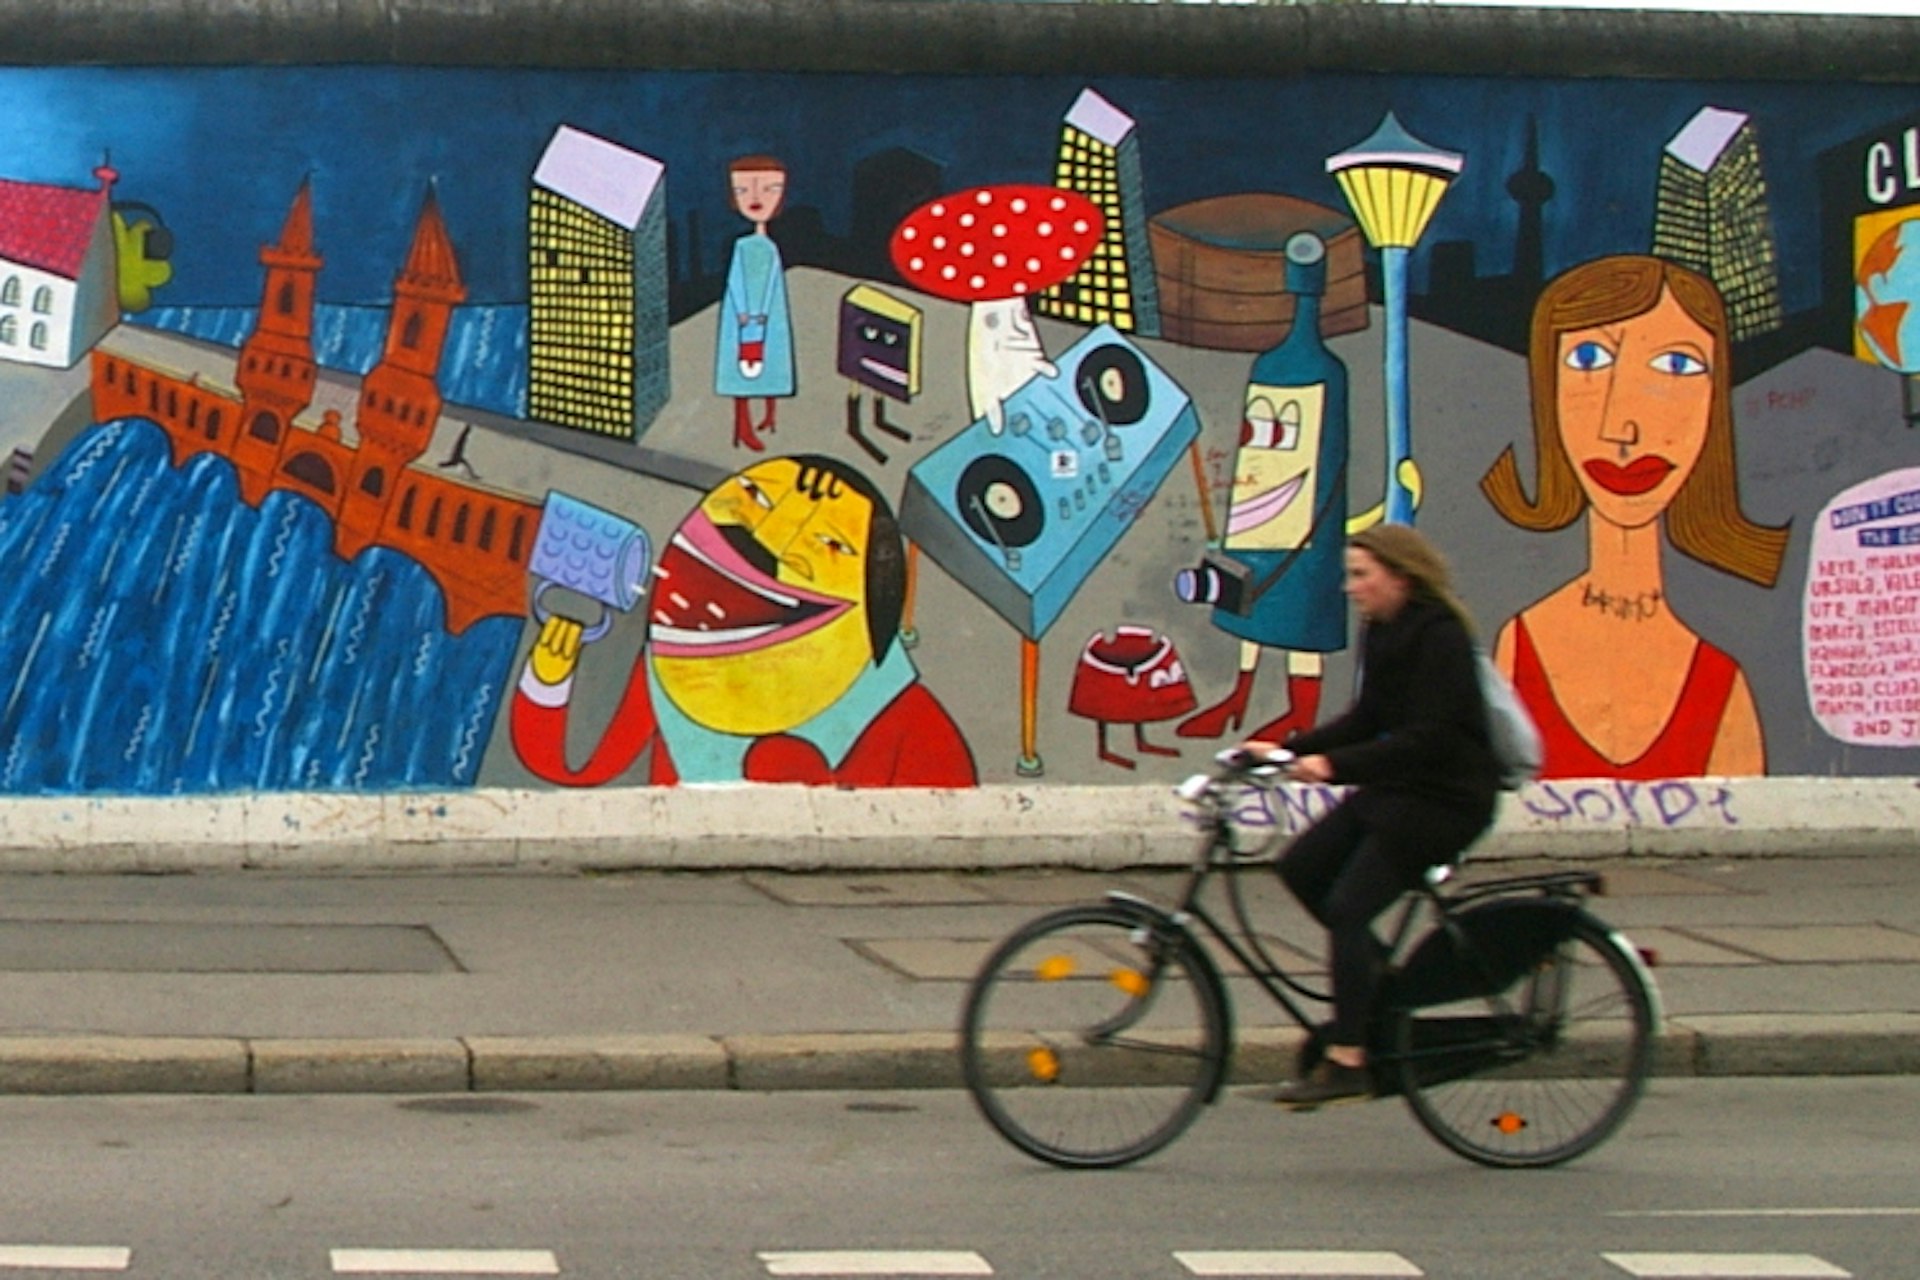 Some of the iconic artwork on the East Side Gallery. Image by Rae Allen / CC BY 2.0